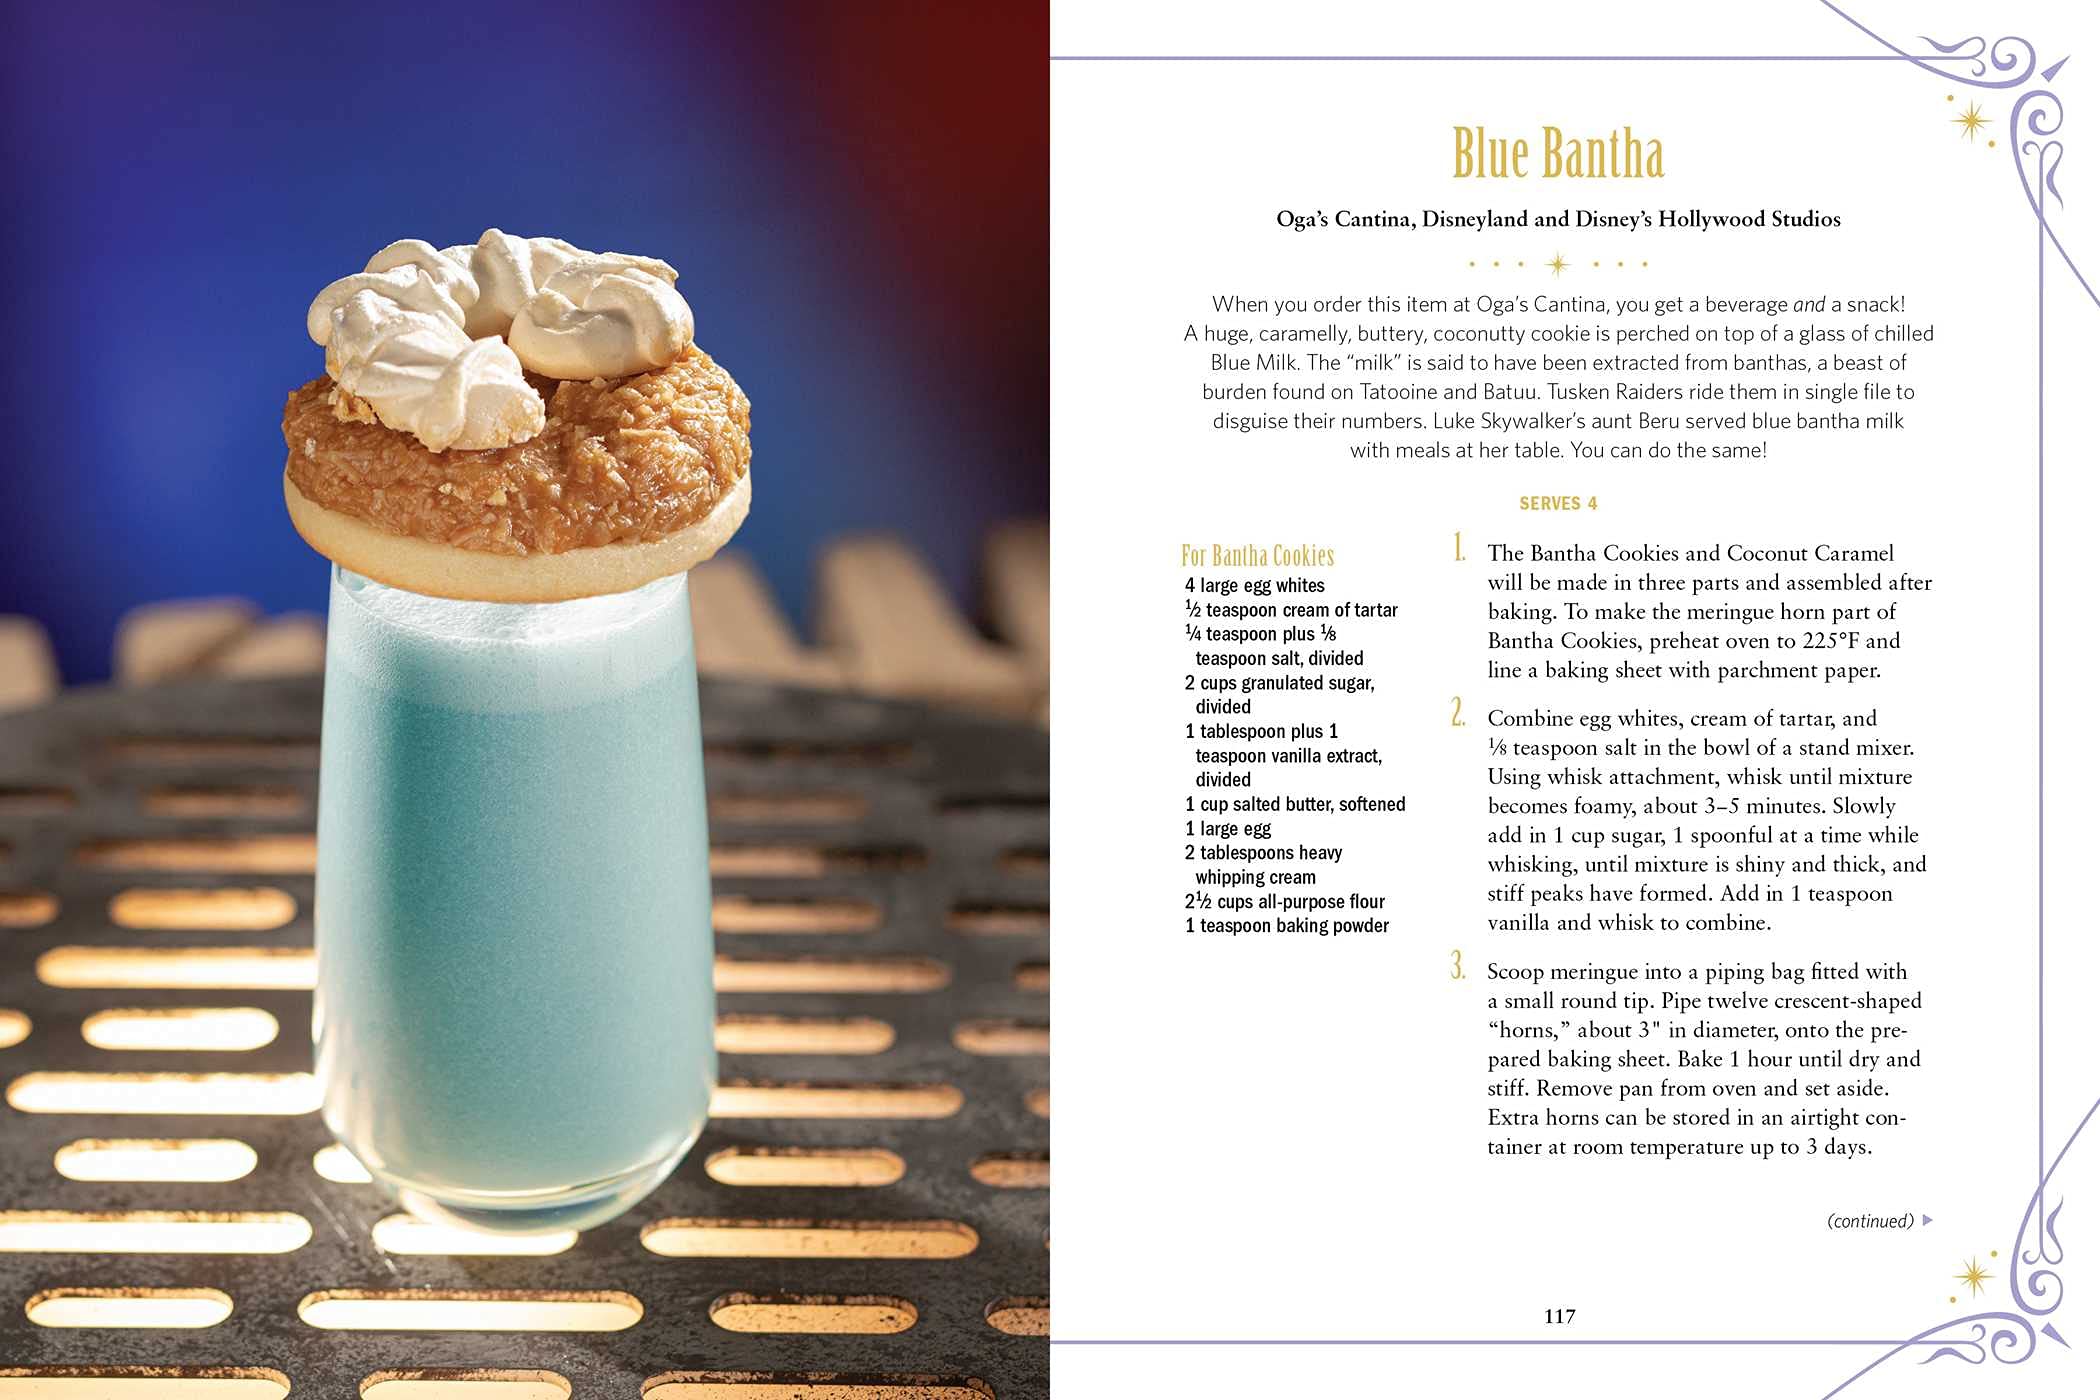 The Unofficial Disney Parks Drink Recipe Book: From LeFou's Brew to the Jedi Mind Trick, 100+ Magical Disney-Inspired Drinks (Unofficial Cookbook)